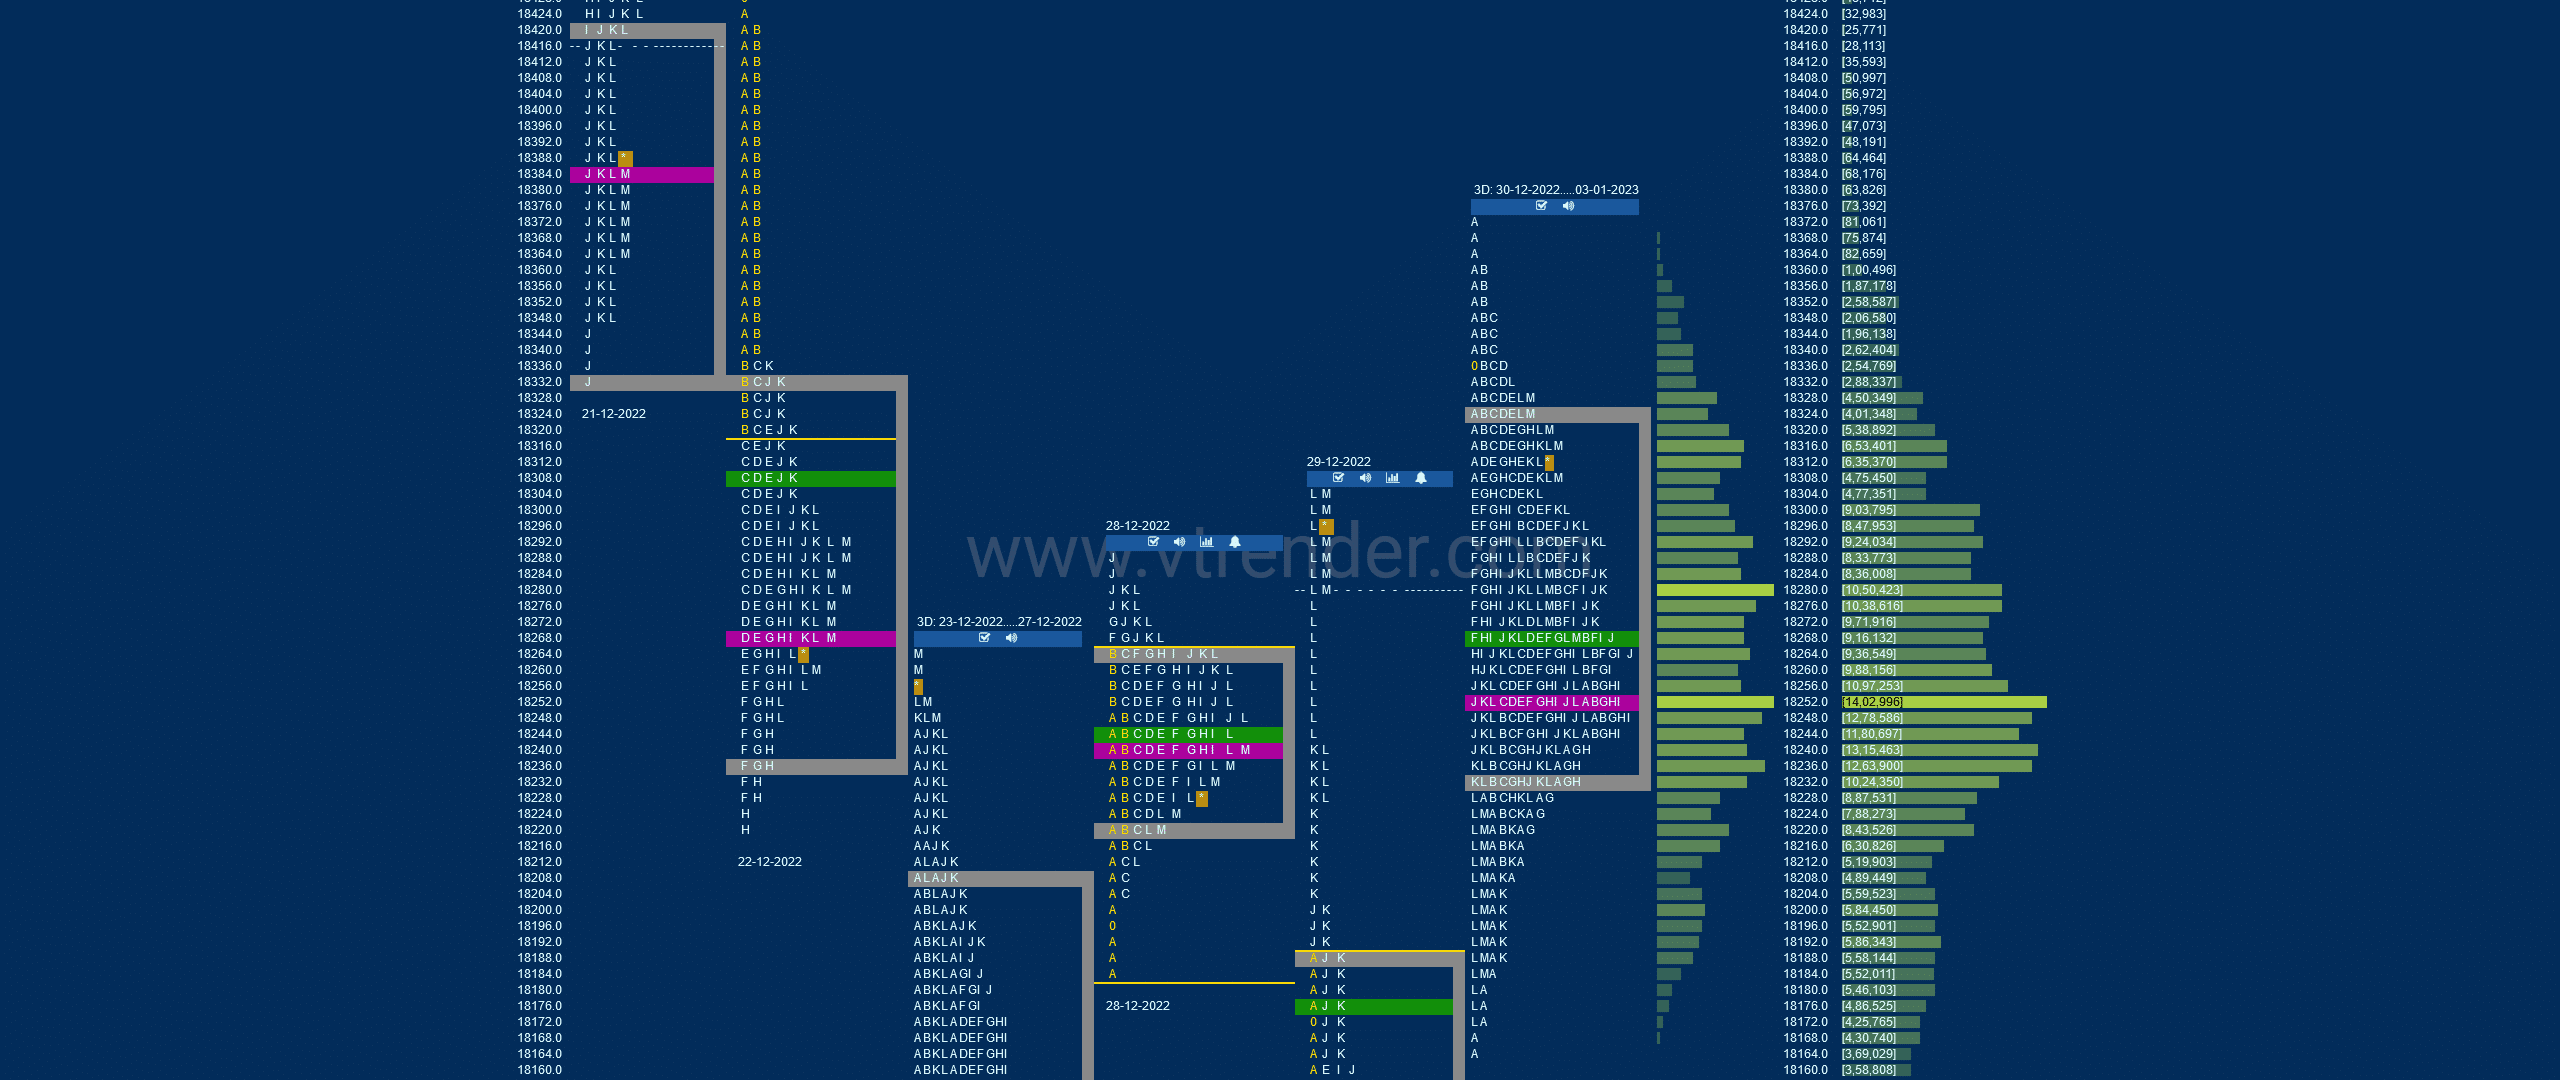 Nf 3Db Market Profile Analysis Dated 03Rd Jan 2023 Banknifty Futures, Charts, Day Trading, Intraday Trading, Intraday Trading Strategies, Market Profile, Market Profile Trading Strategies, Nifty Futures, Order Flow Analysis, Support And Resistance, Technical Analysis, Trading Strategies, Volume Profile Trading